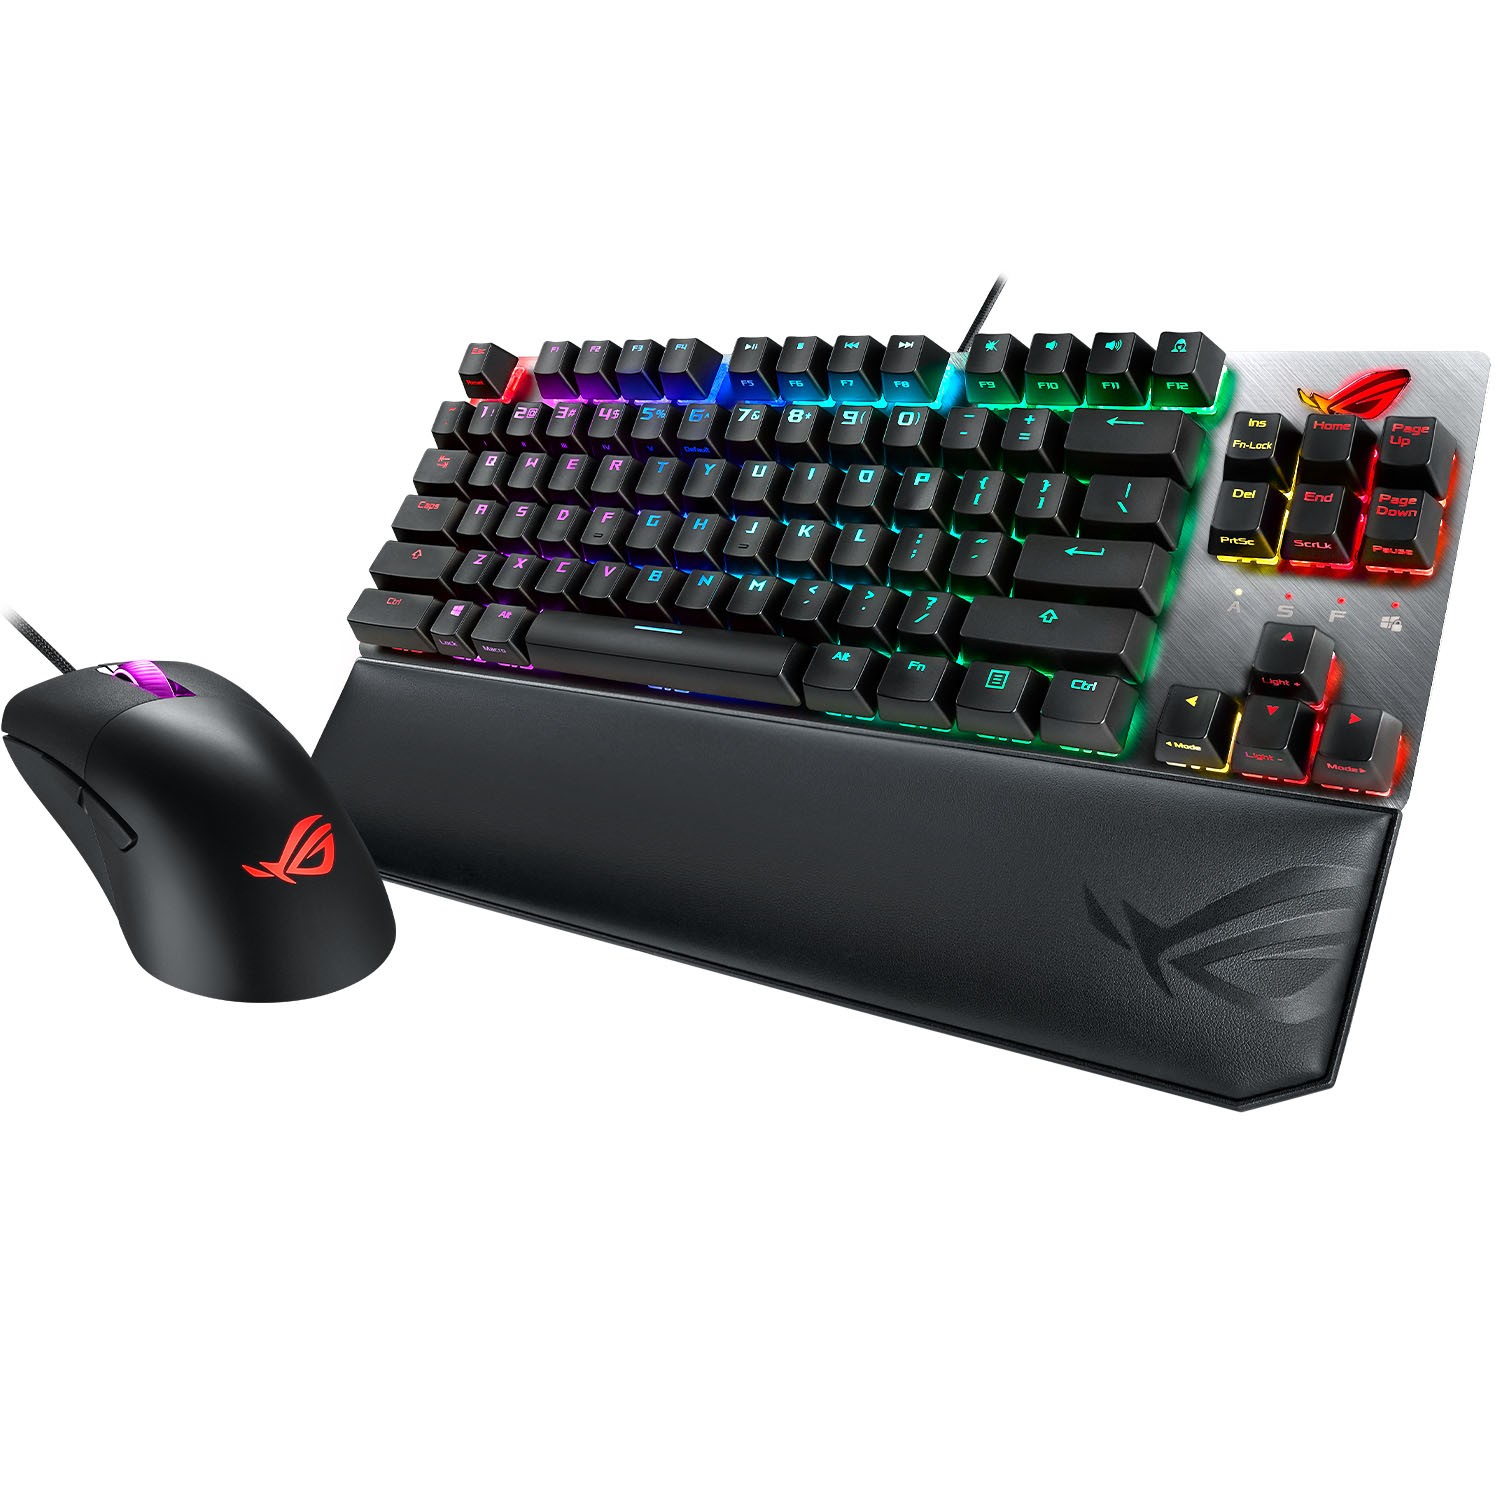 Asus - ASUS ROG Strix Scope TKL Deluxe Red Keyboard and Keris Mouse Bundle